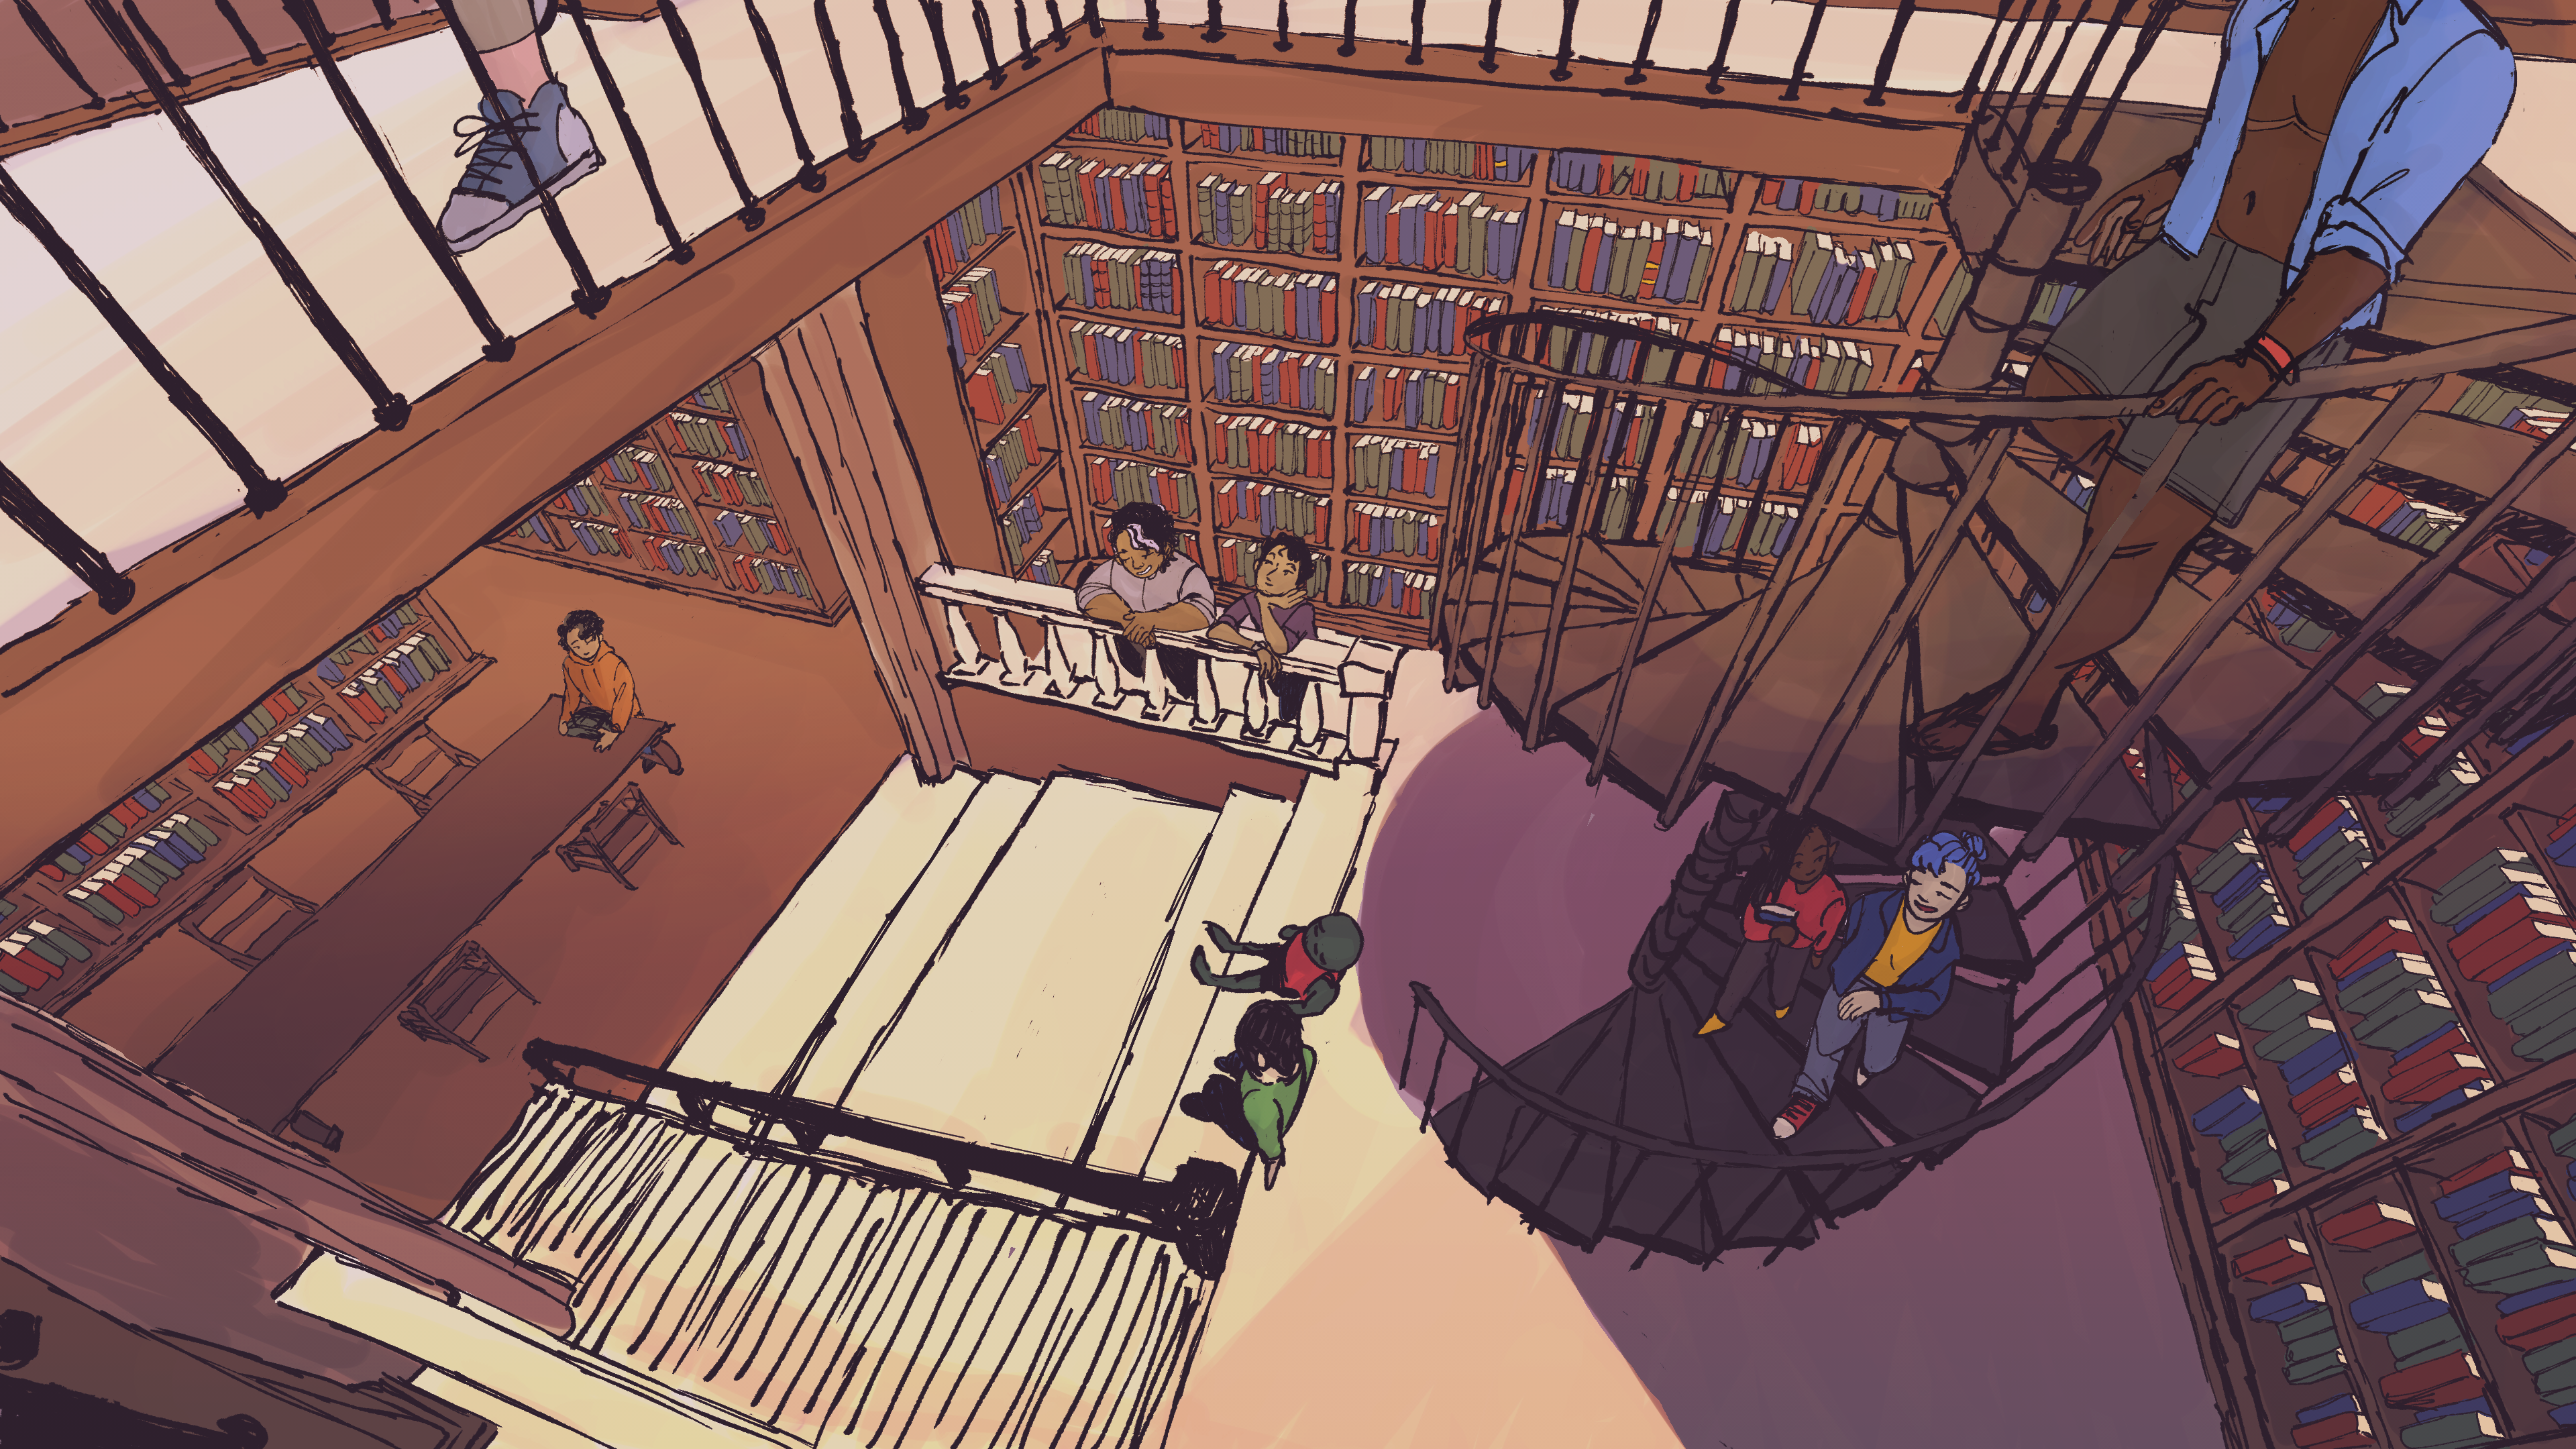 A digital drawing of the Chicago Firefighters from the game Blaseball in a library. There is a large grey spiral staircase in the right part of the image, and three people are stepping down it. Connected to the top of this staircase is an upper floor where someone else is walking. To the left of this staircase is another set of shallow stairs, where two more people are seated, and a ramp descending into a connected room. The bookshelves are tall and from floor to ceiling. There is a long table surrounded by chairs in the connected room, and another person is putting books on it. Near the shallow staircase is a railing where two more people lean on.